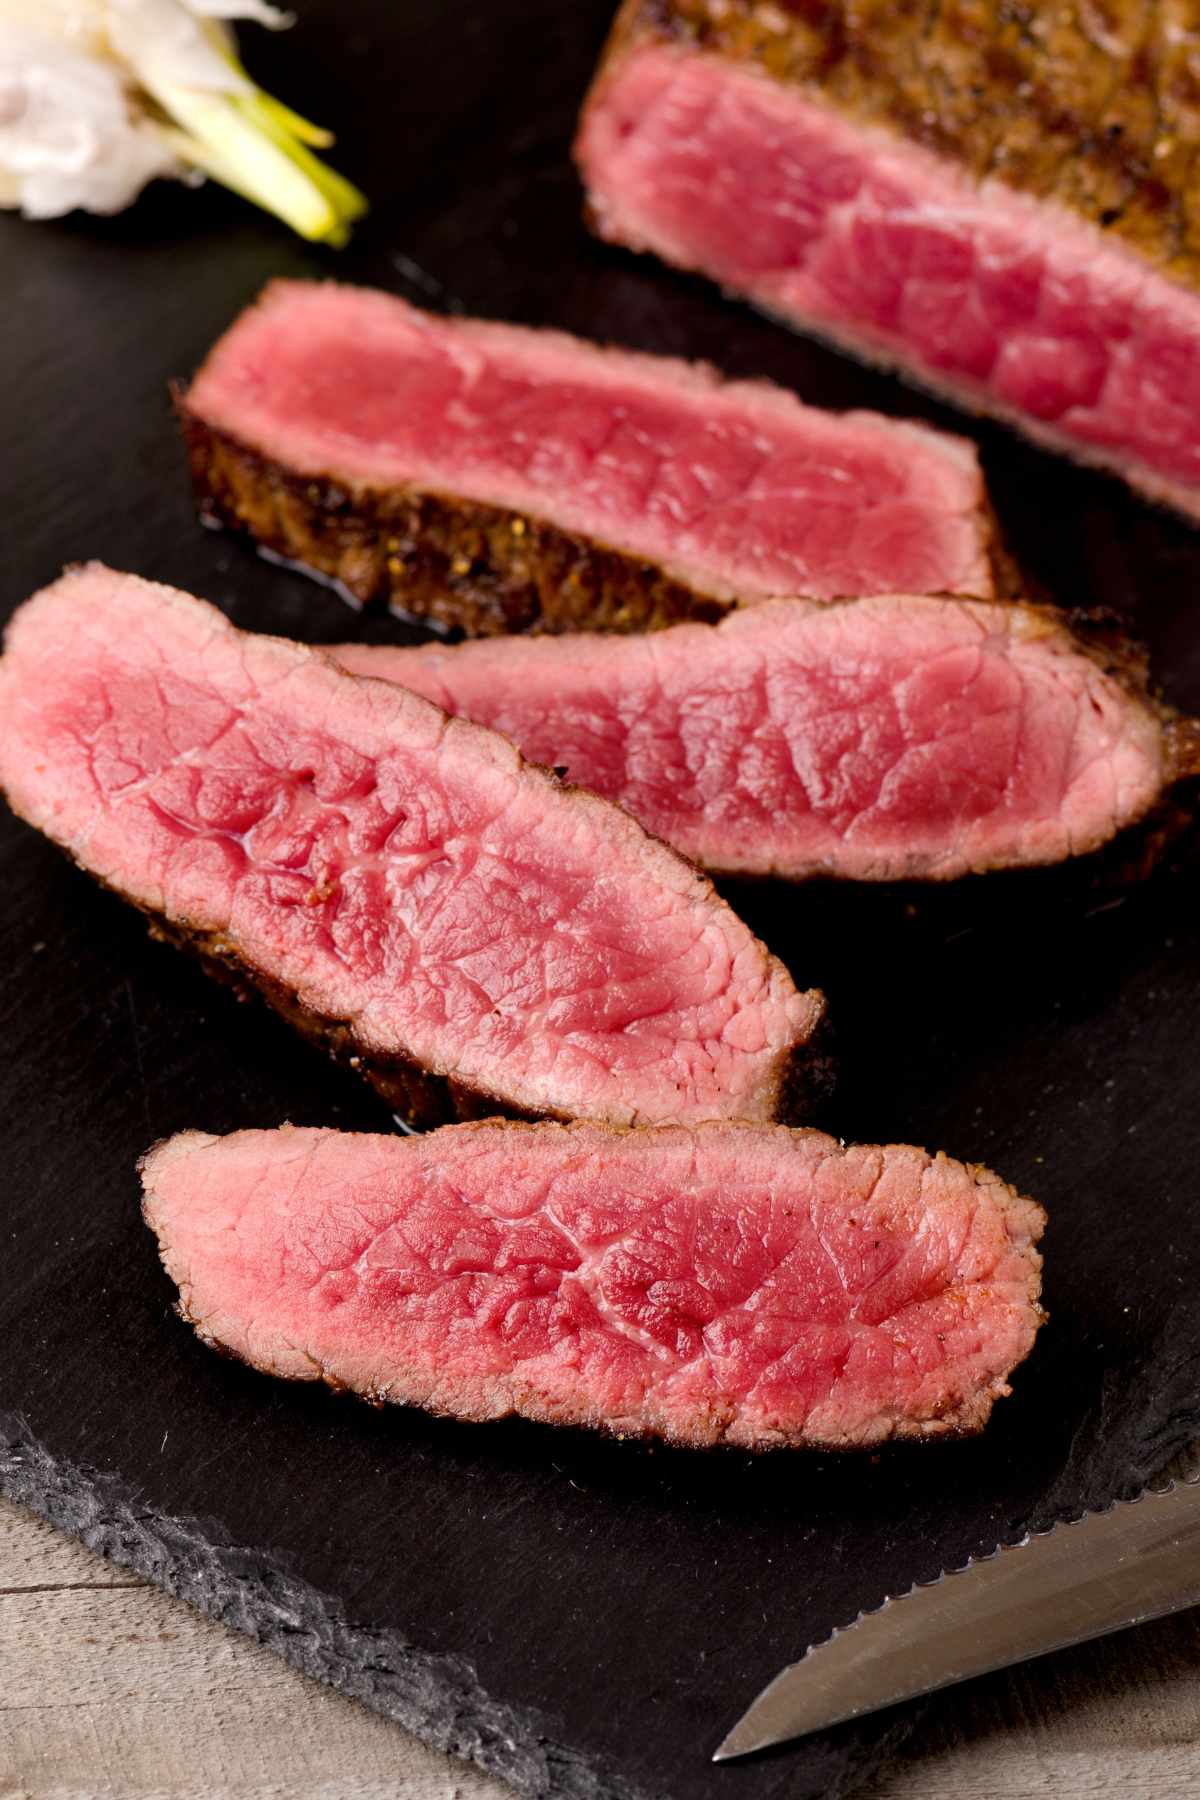 Wondering what a Rare Beef Temp should be? Find out how to measure rare beef temperature, whether you’re cooking a steak, roast or any other cut.